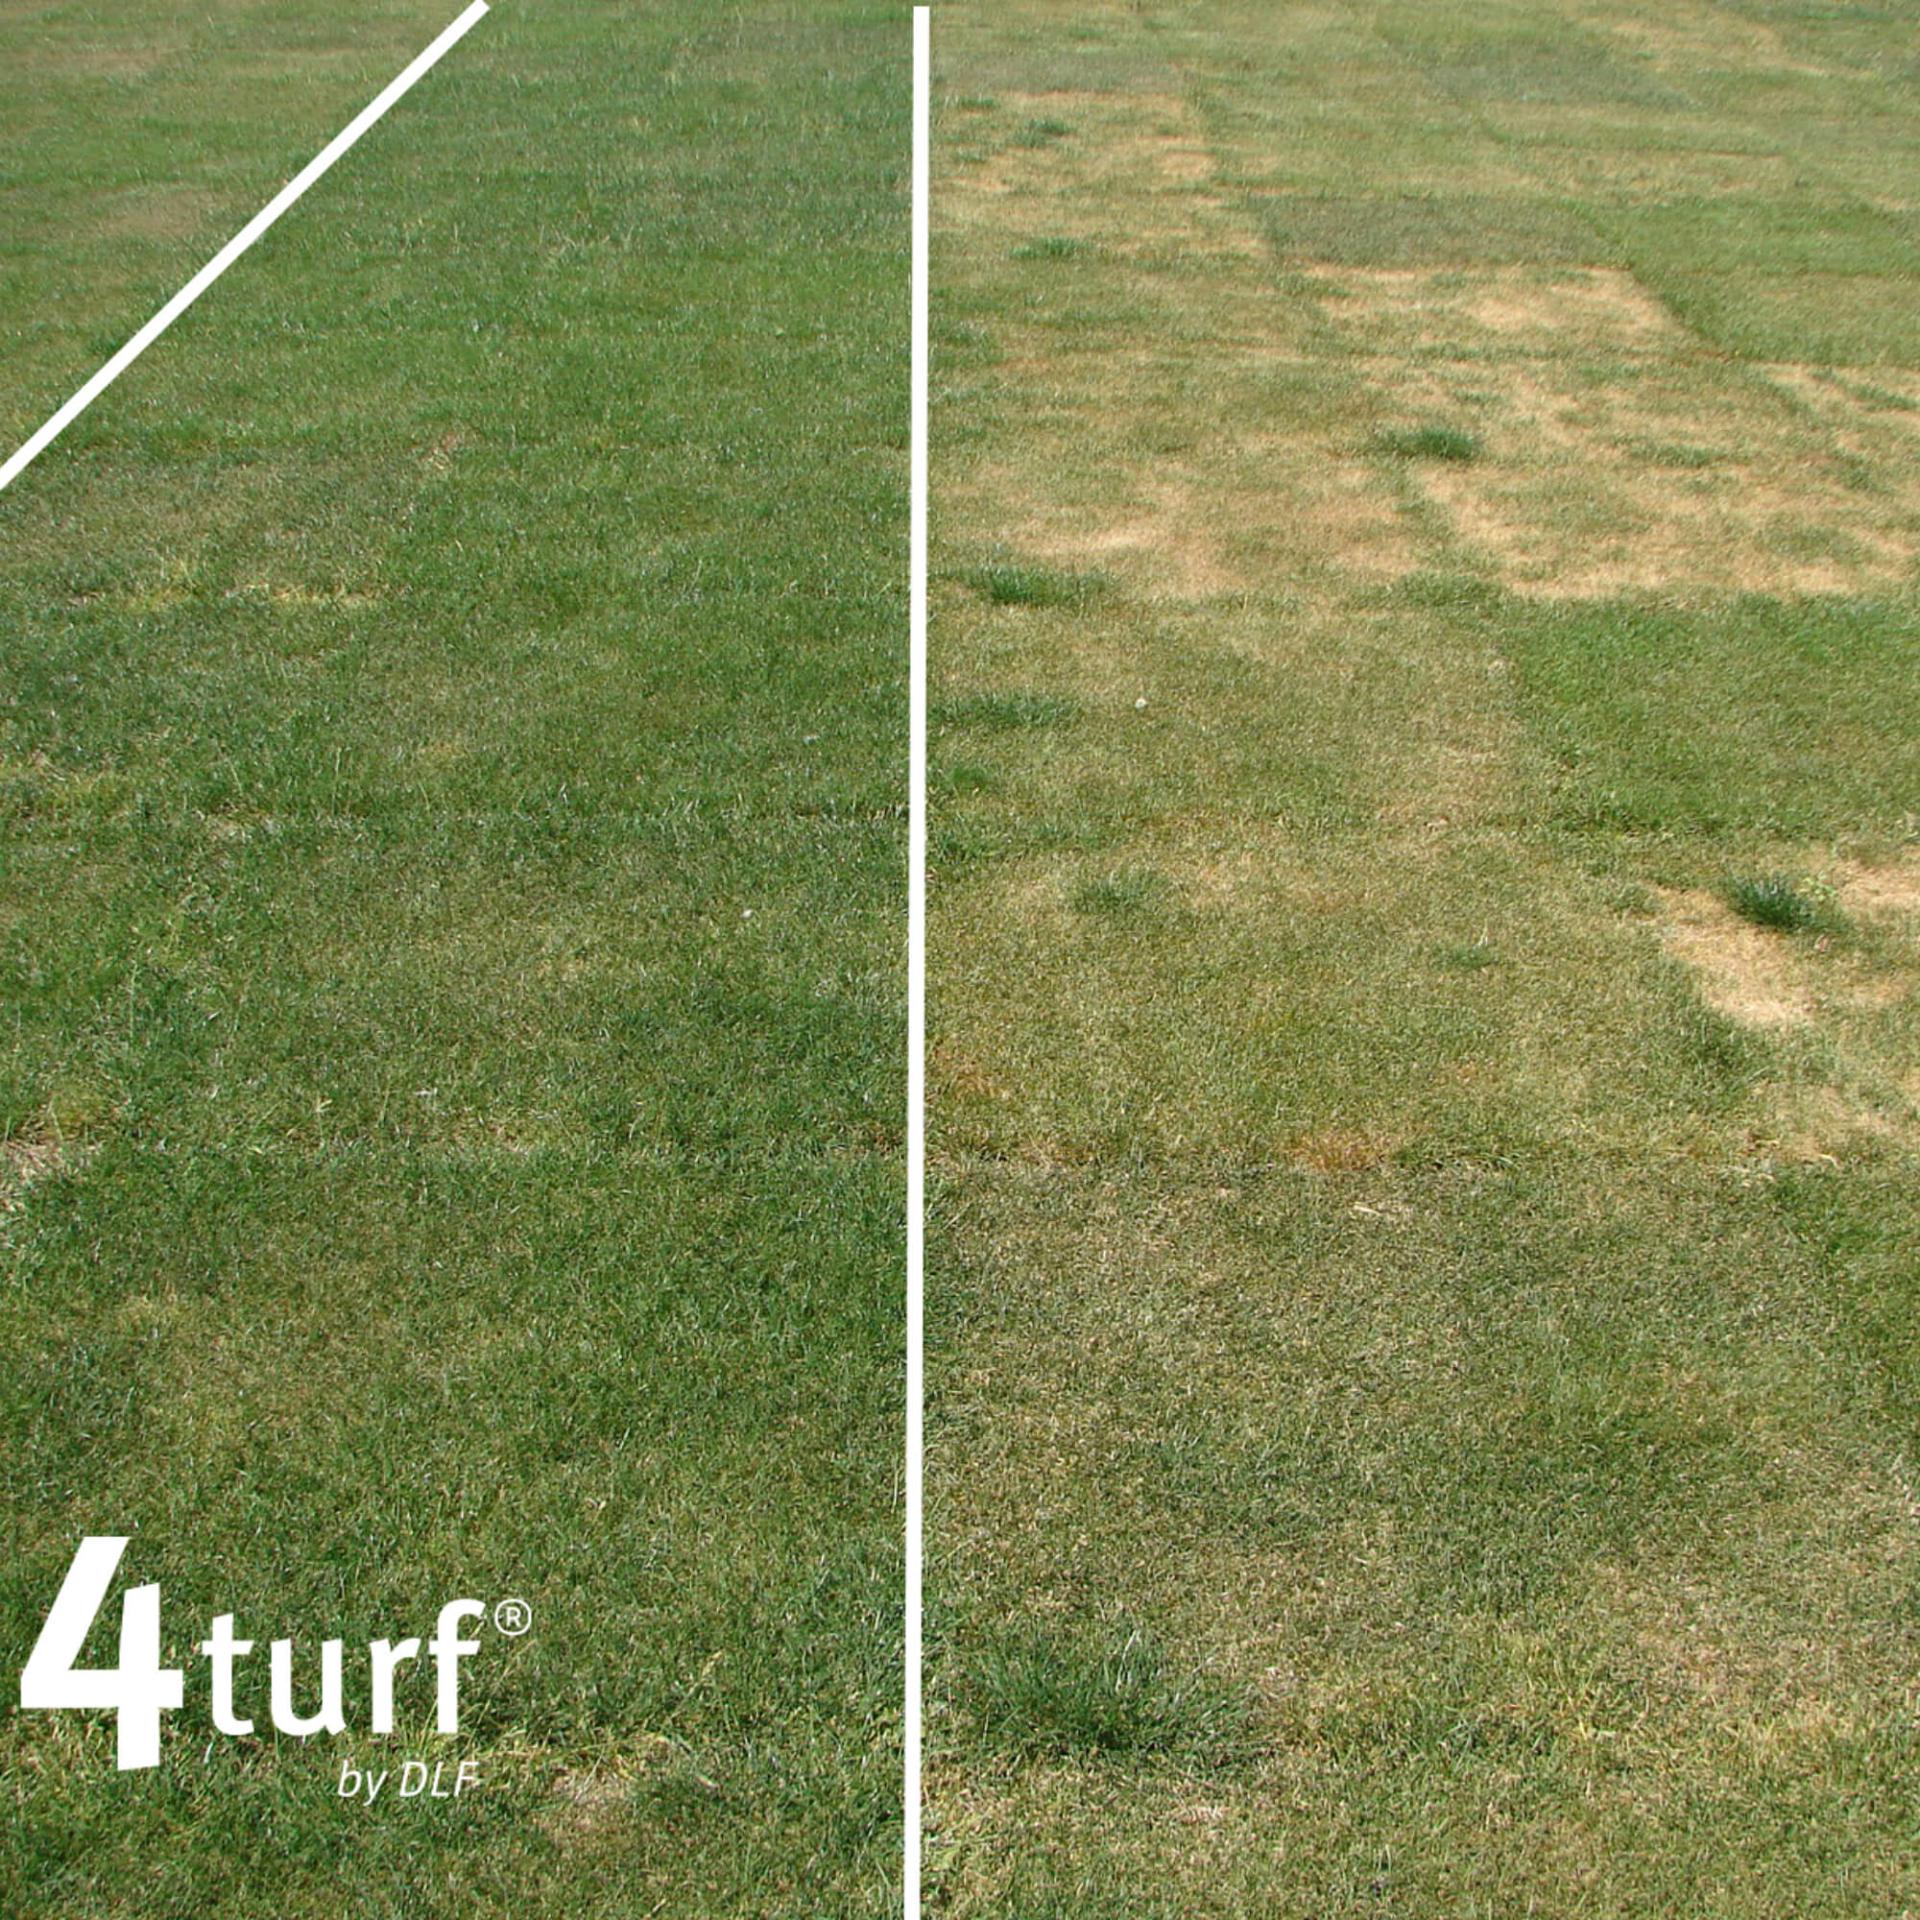 4TURF® stays green and playable through spring and summer droughts